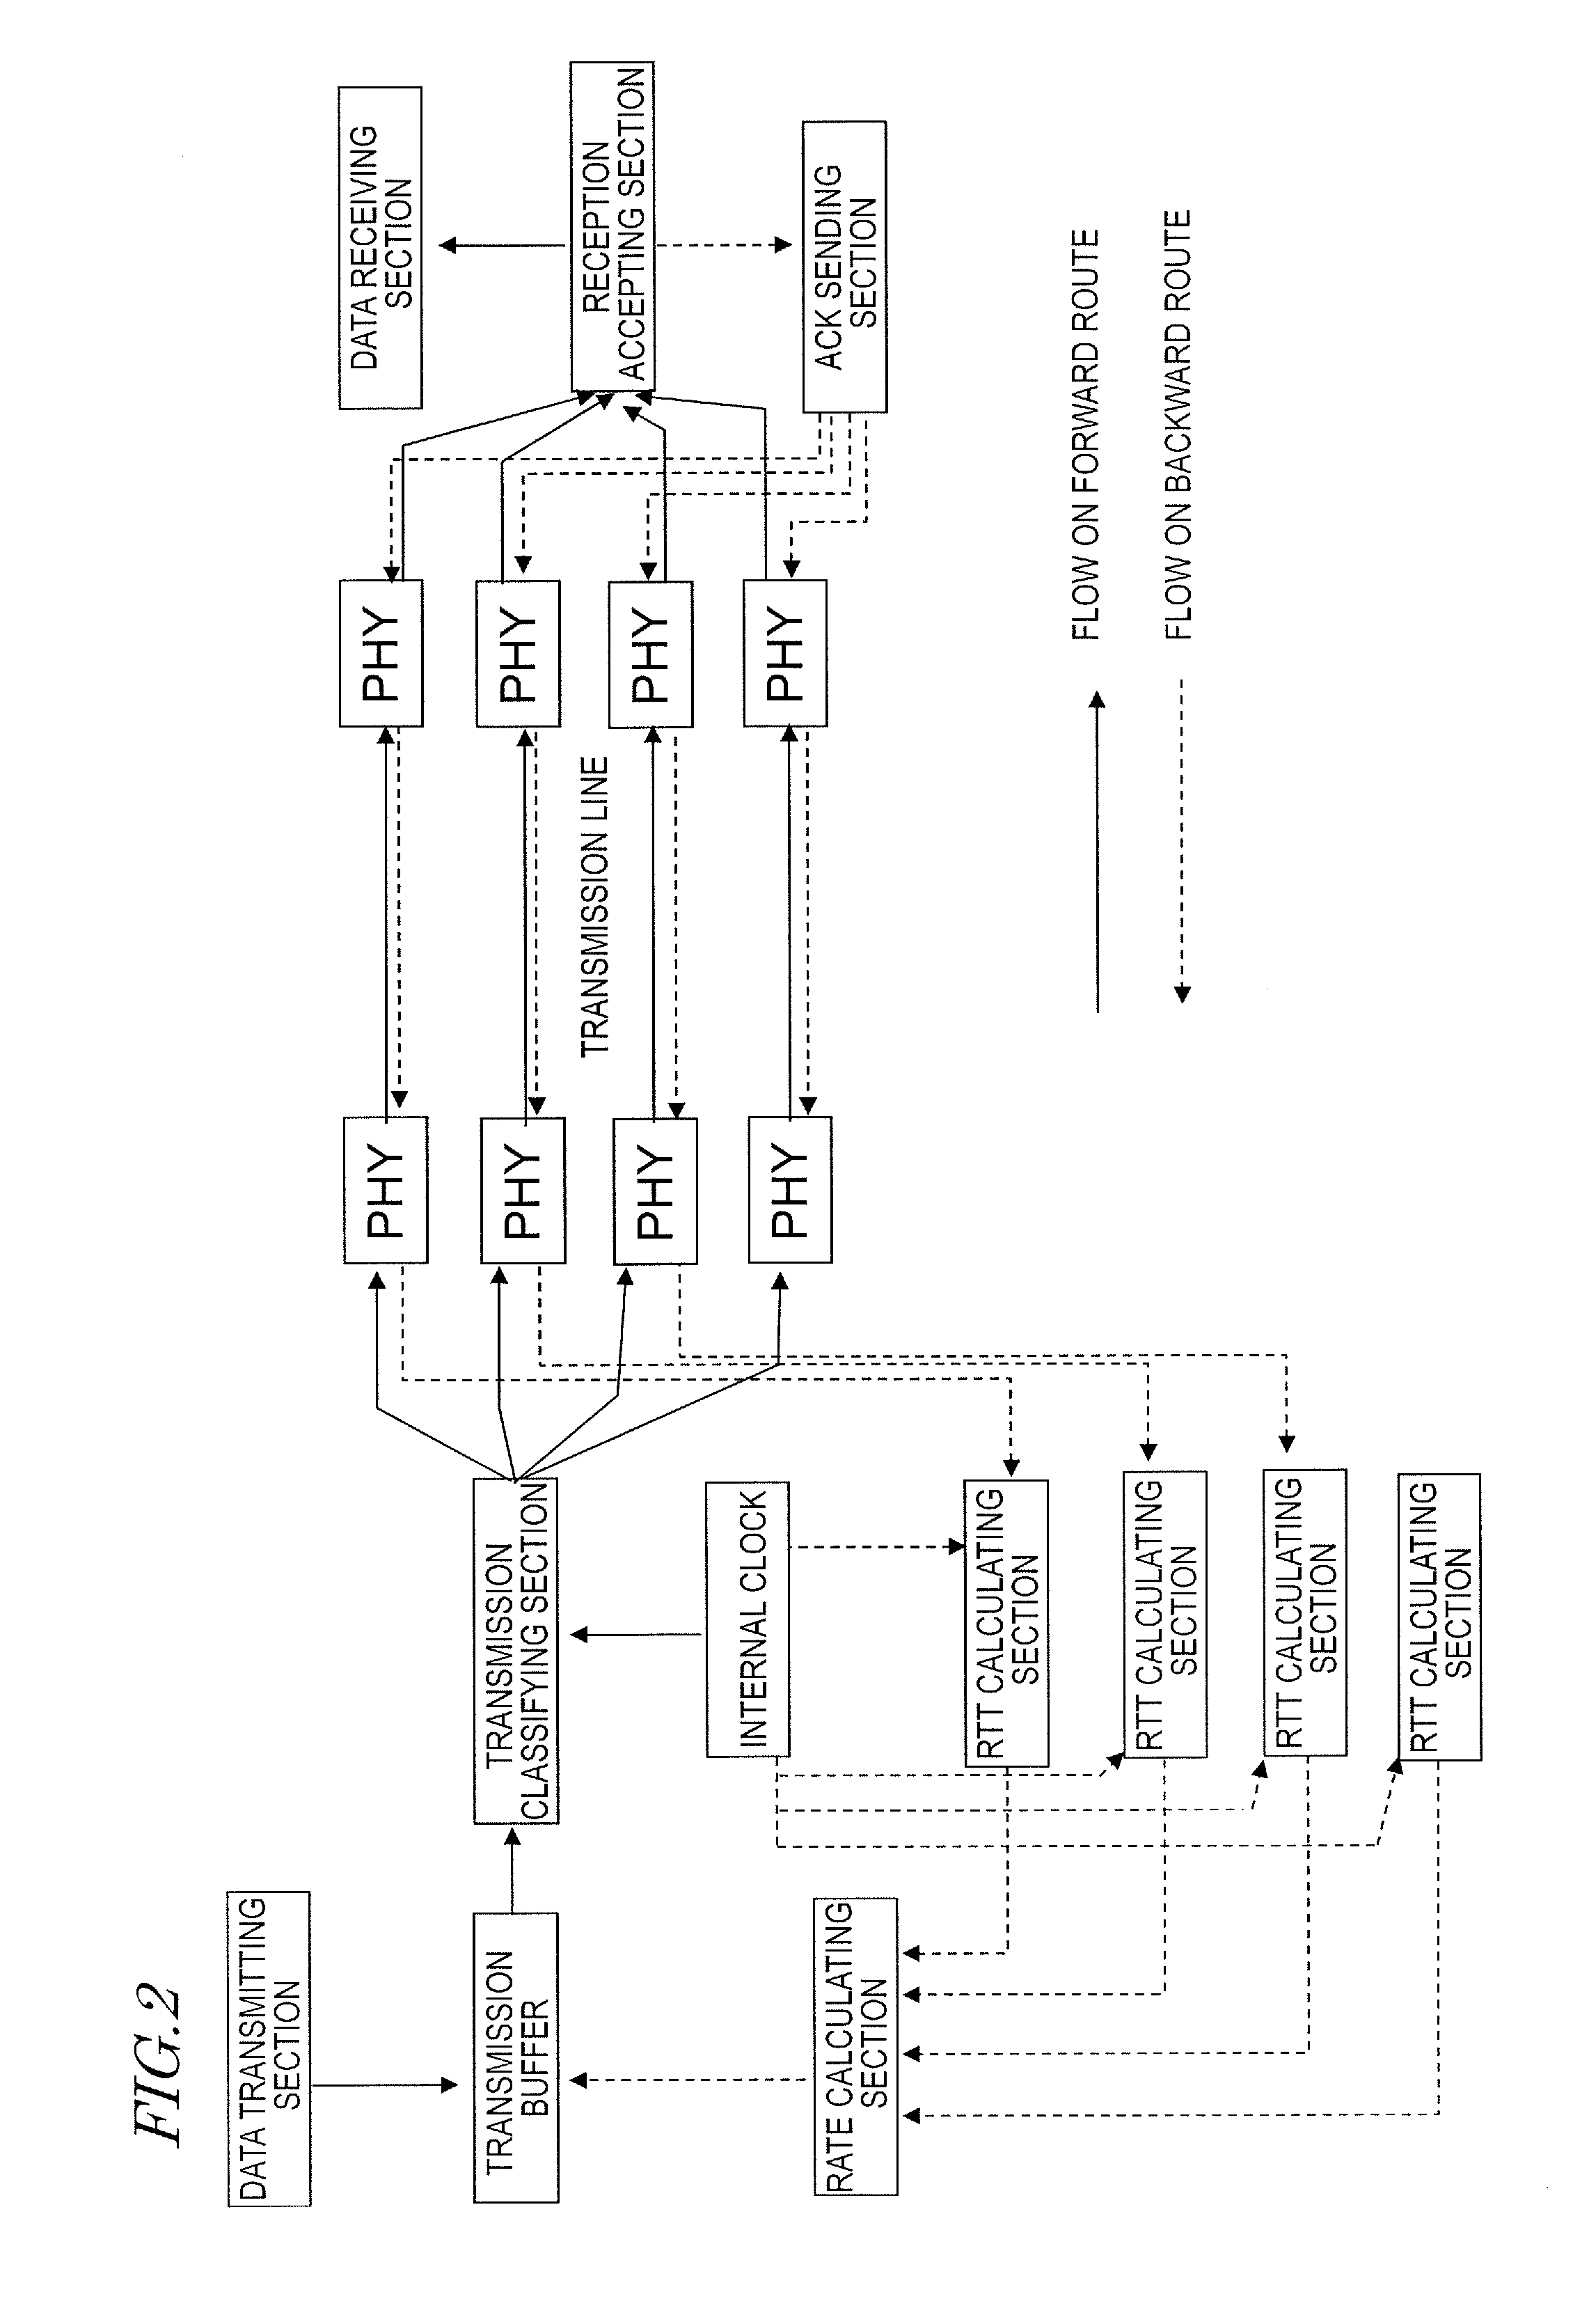 Bus system for semiconductor circuit